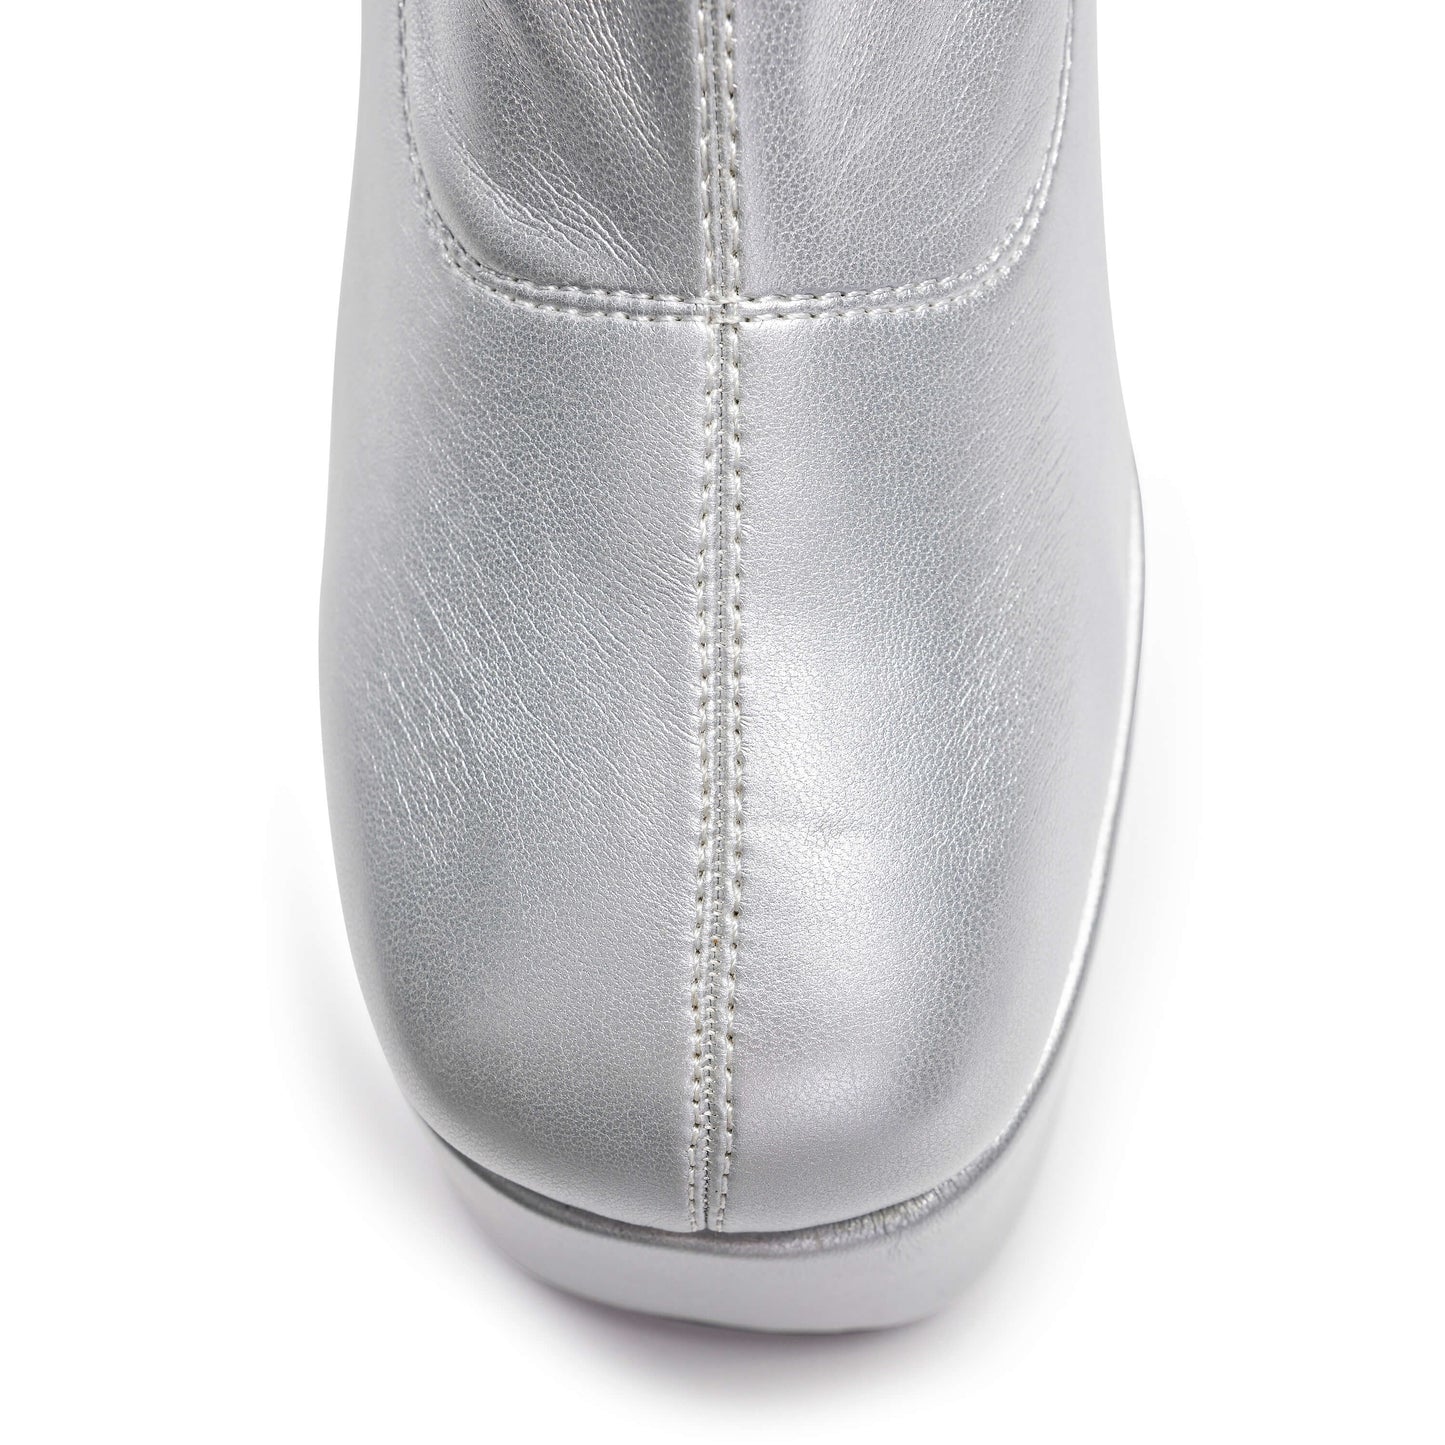 Delano Men's Silver Platform Heeled Boots - Ankle Boots - KOI Footwear - Silver - Top View